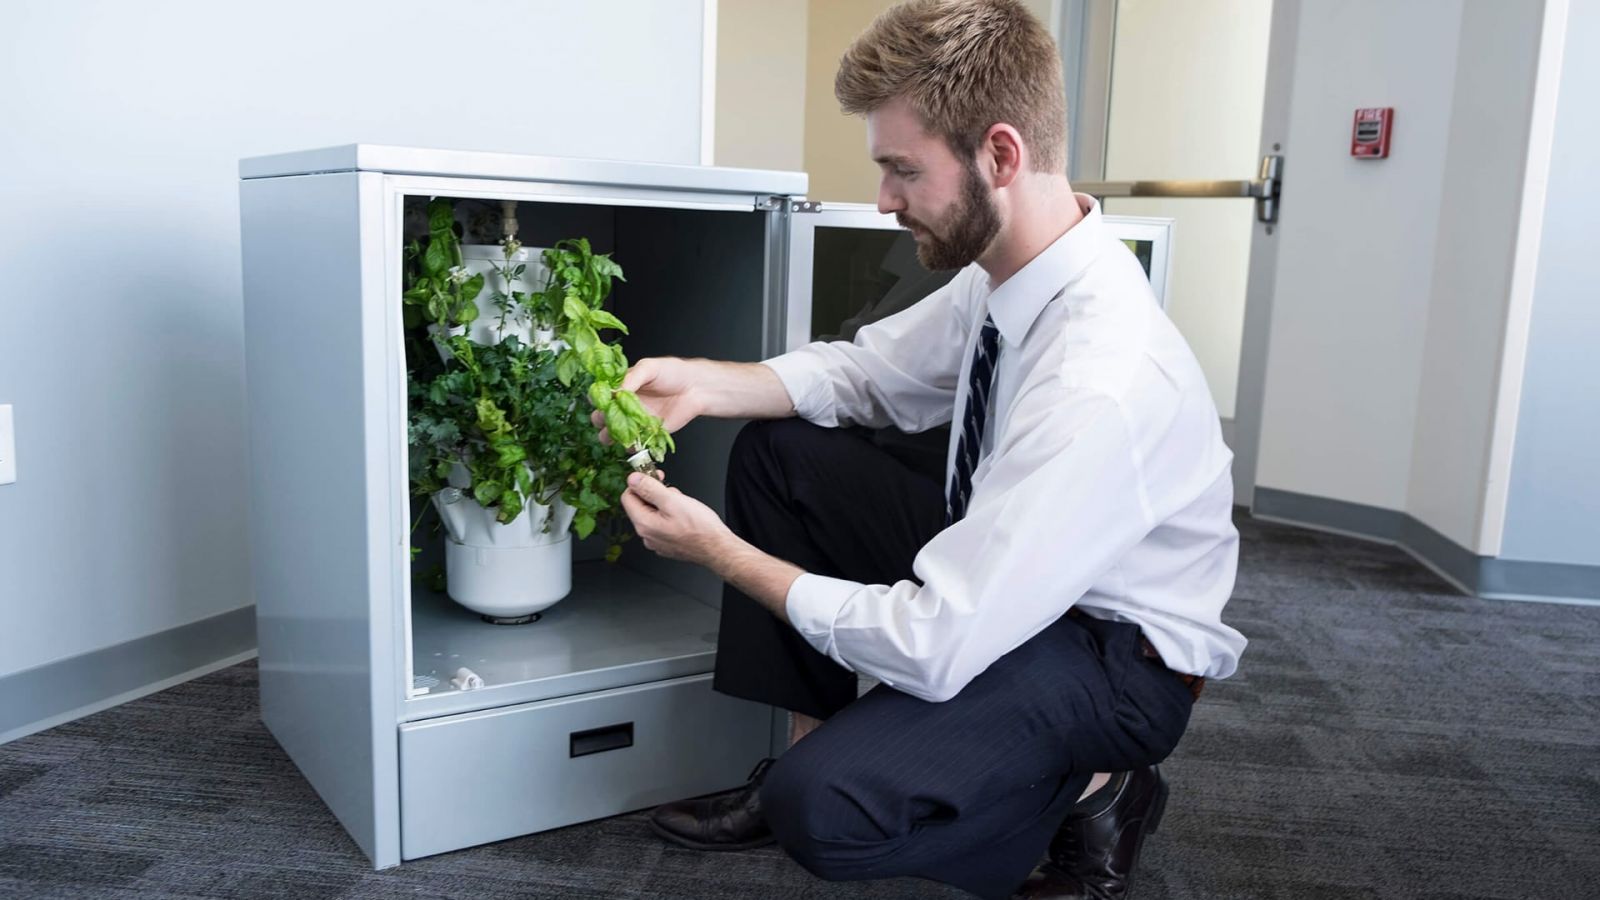 Scott Massey, Heliponix LLC chief executive officer, examines the development of plants growing in a GroPod, a dishwasher-sized appliance that fits under a kitchen counter and grows produce year-round. Heliponix was among five companies selected to receive $80,000 investments from the Elevate Purdue Foundry Fund. (Chris Adam/Purdue Research Foundation Image)